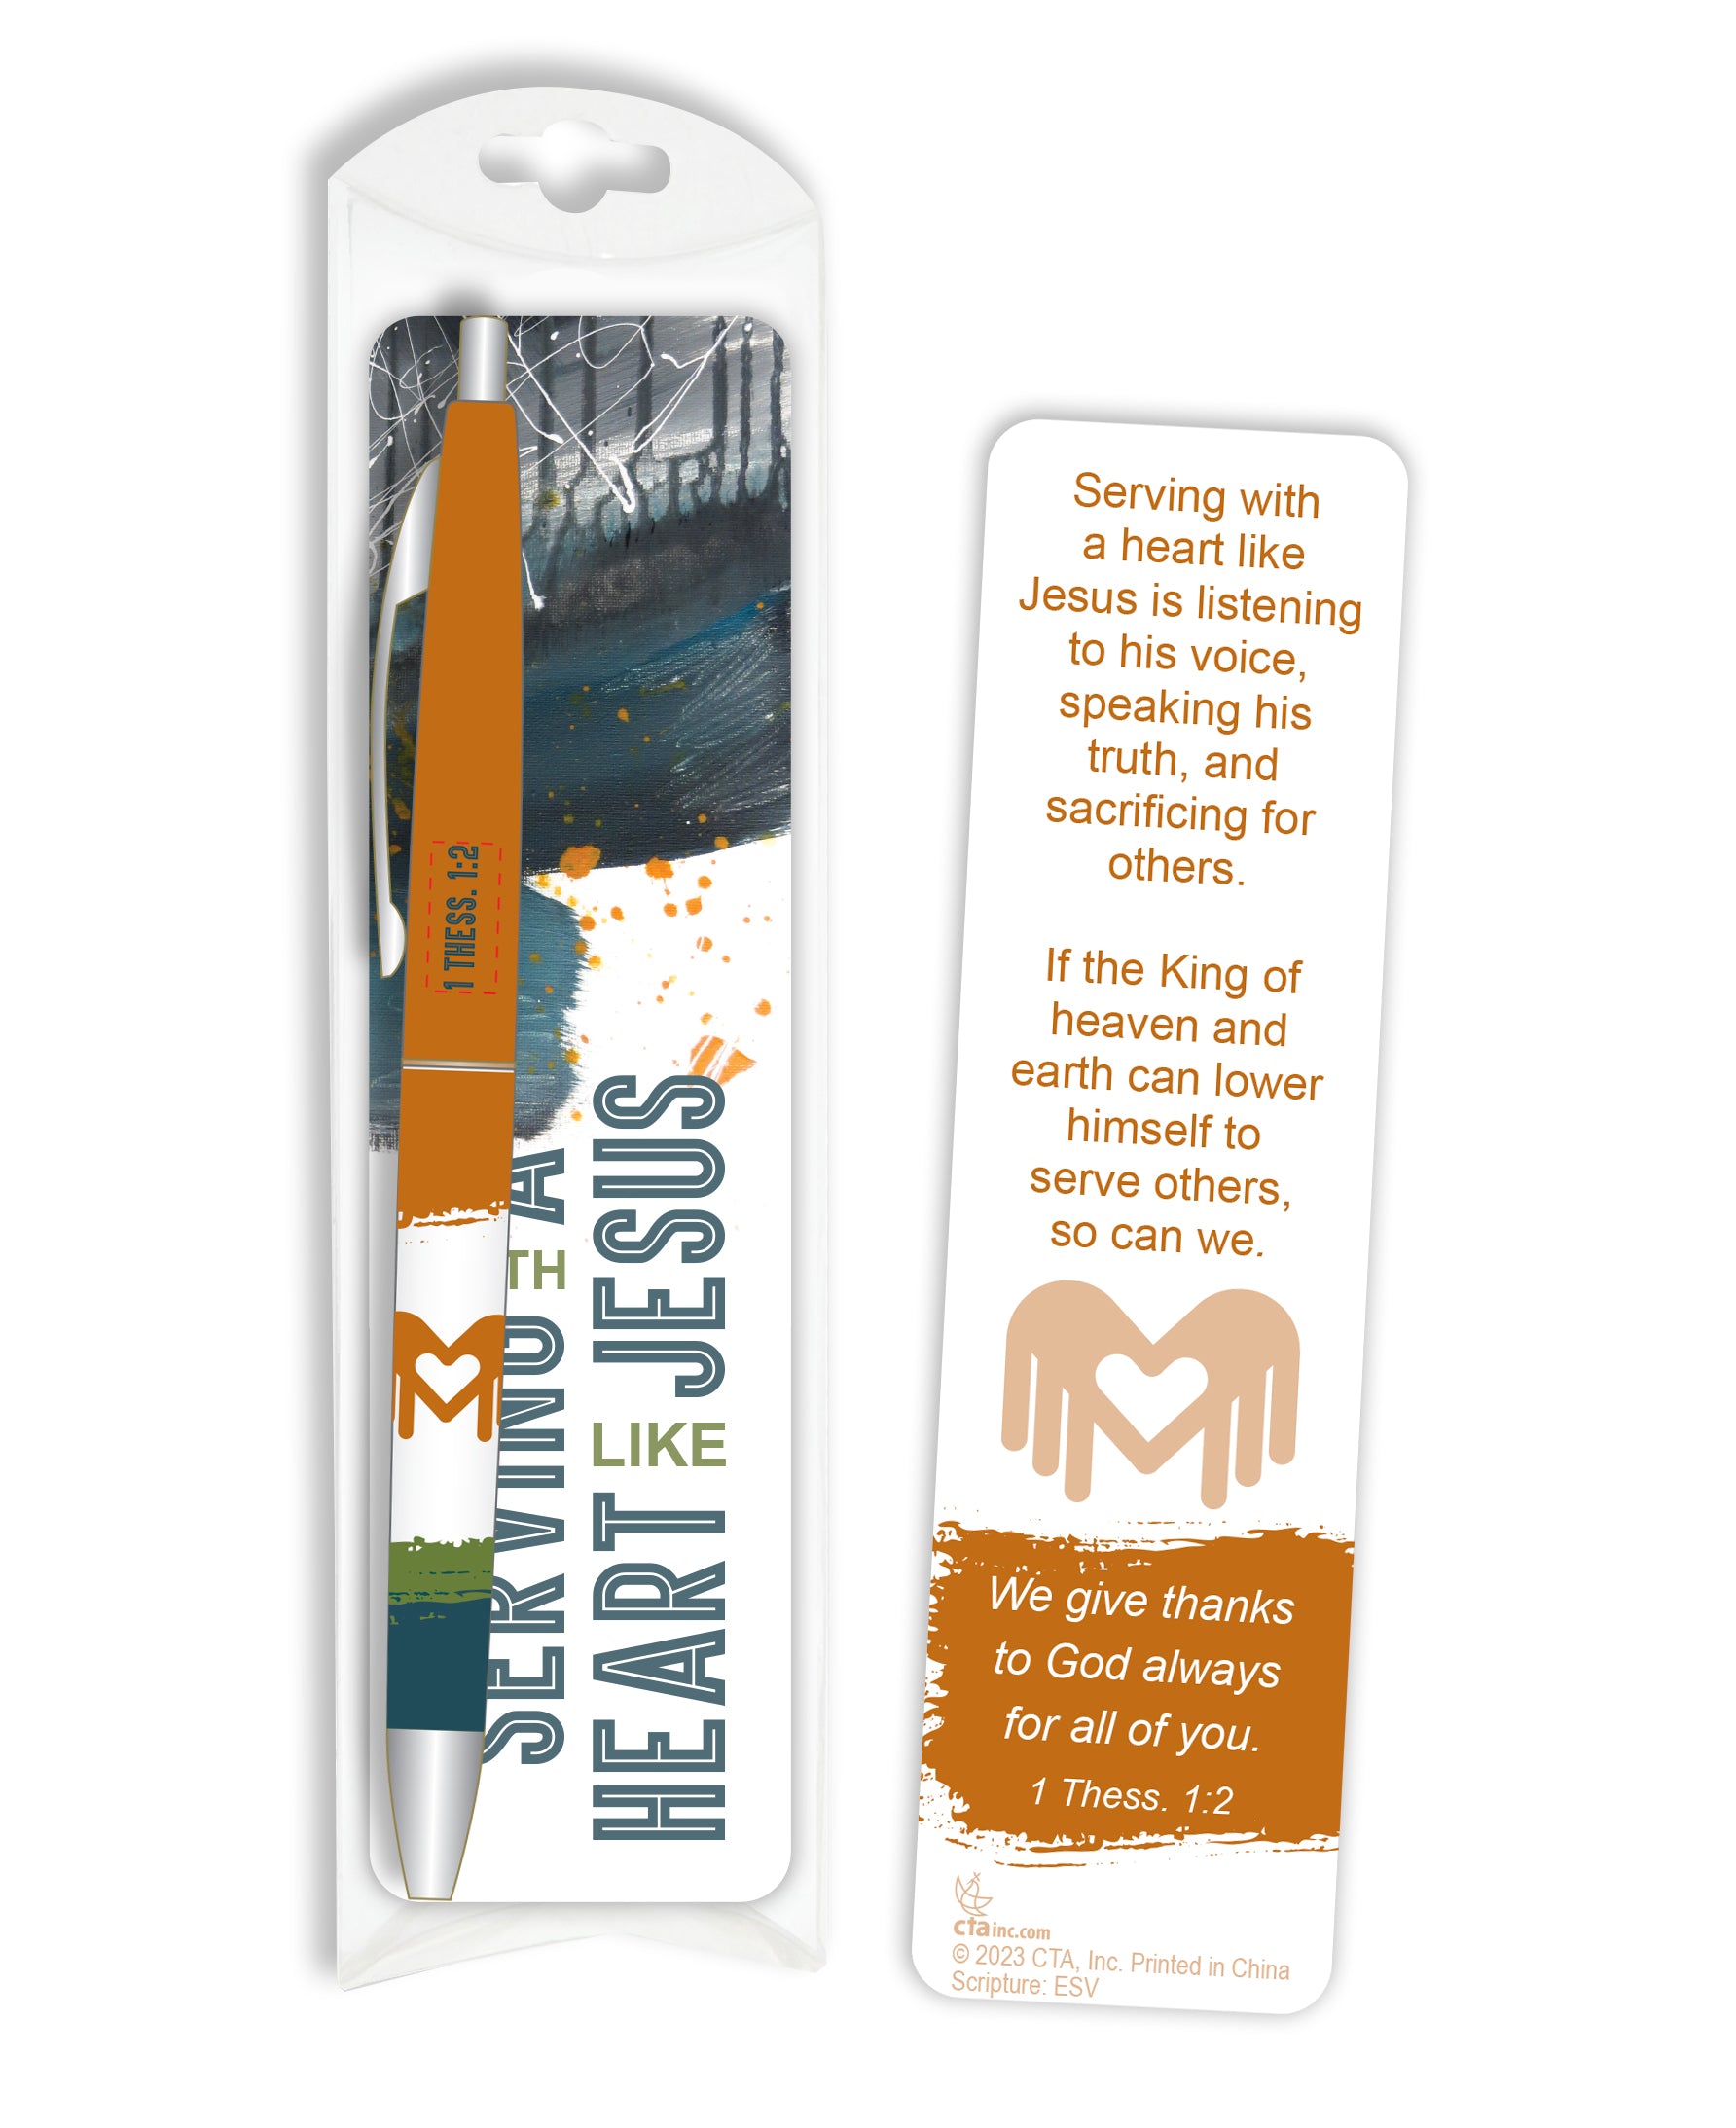 Christian bookmark & pen set for volunteers & staff from the Serving with a Heart Like Jesus product line